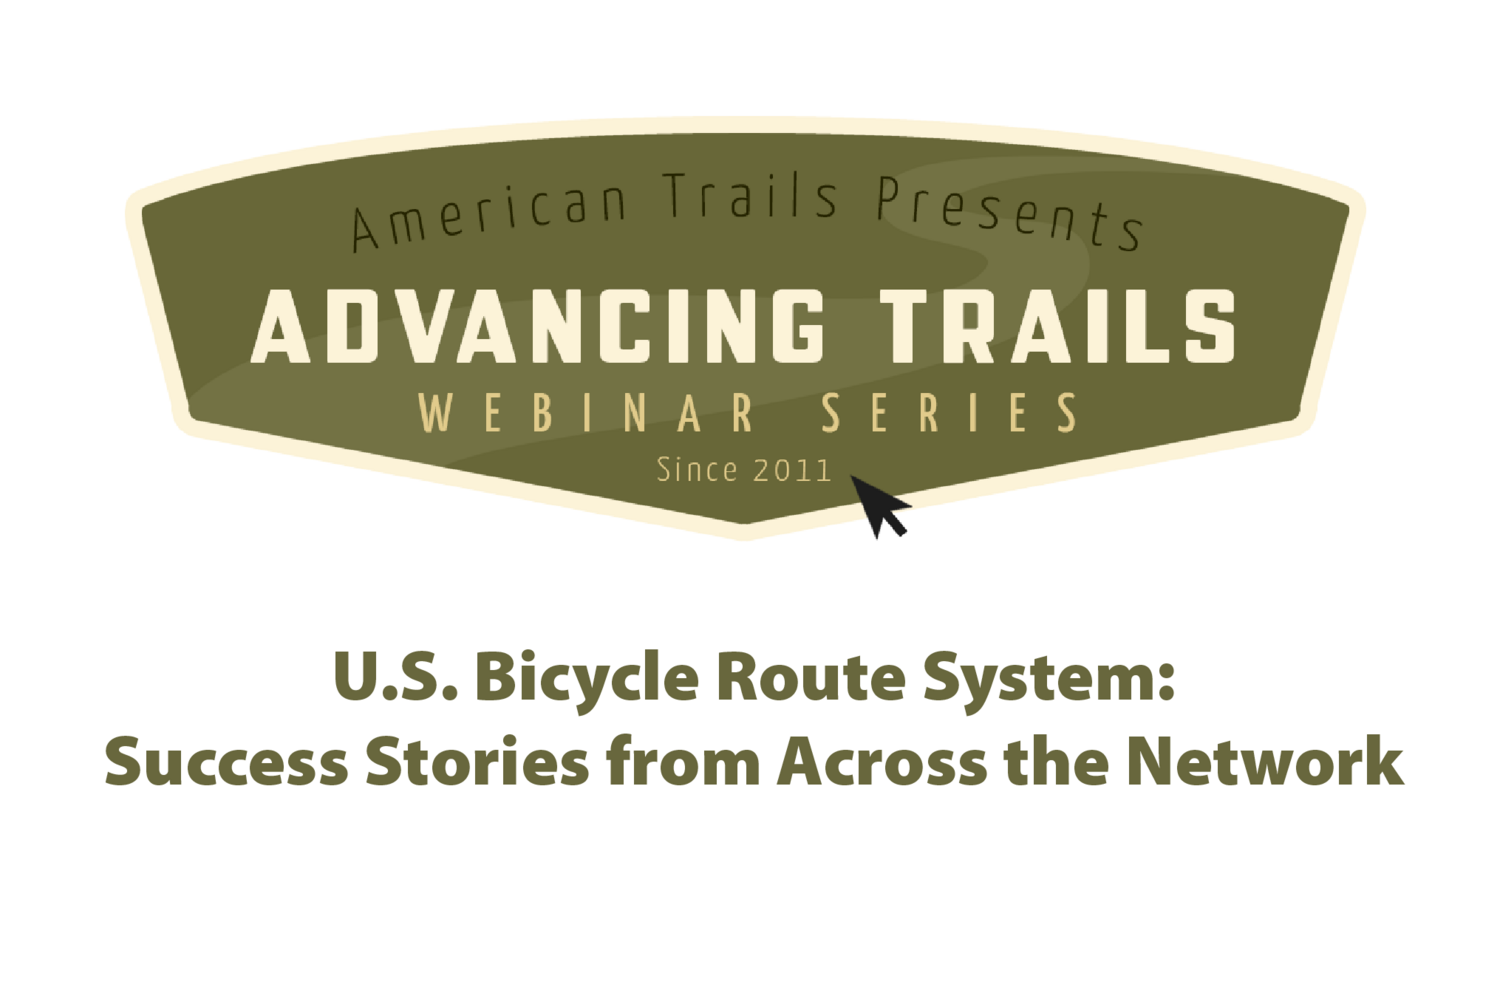 U.S. Bicycle Route System: Success Stories from Across the Network (RECORDING)